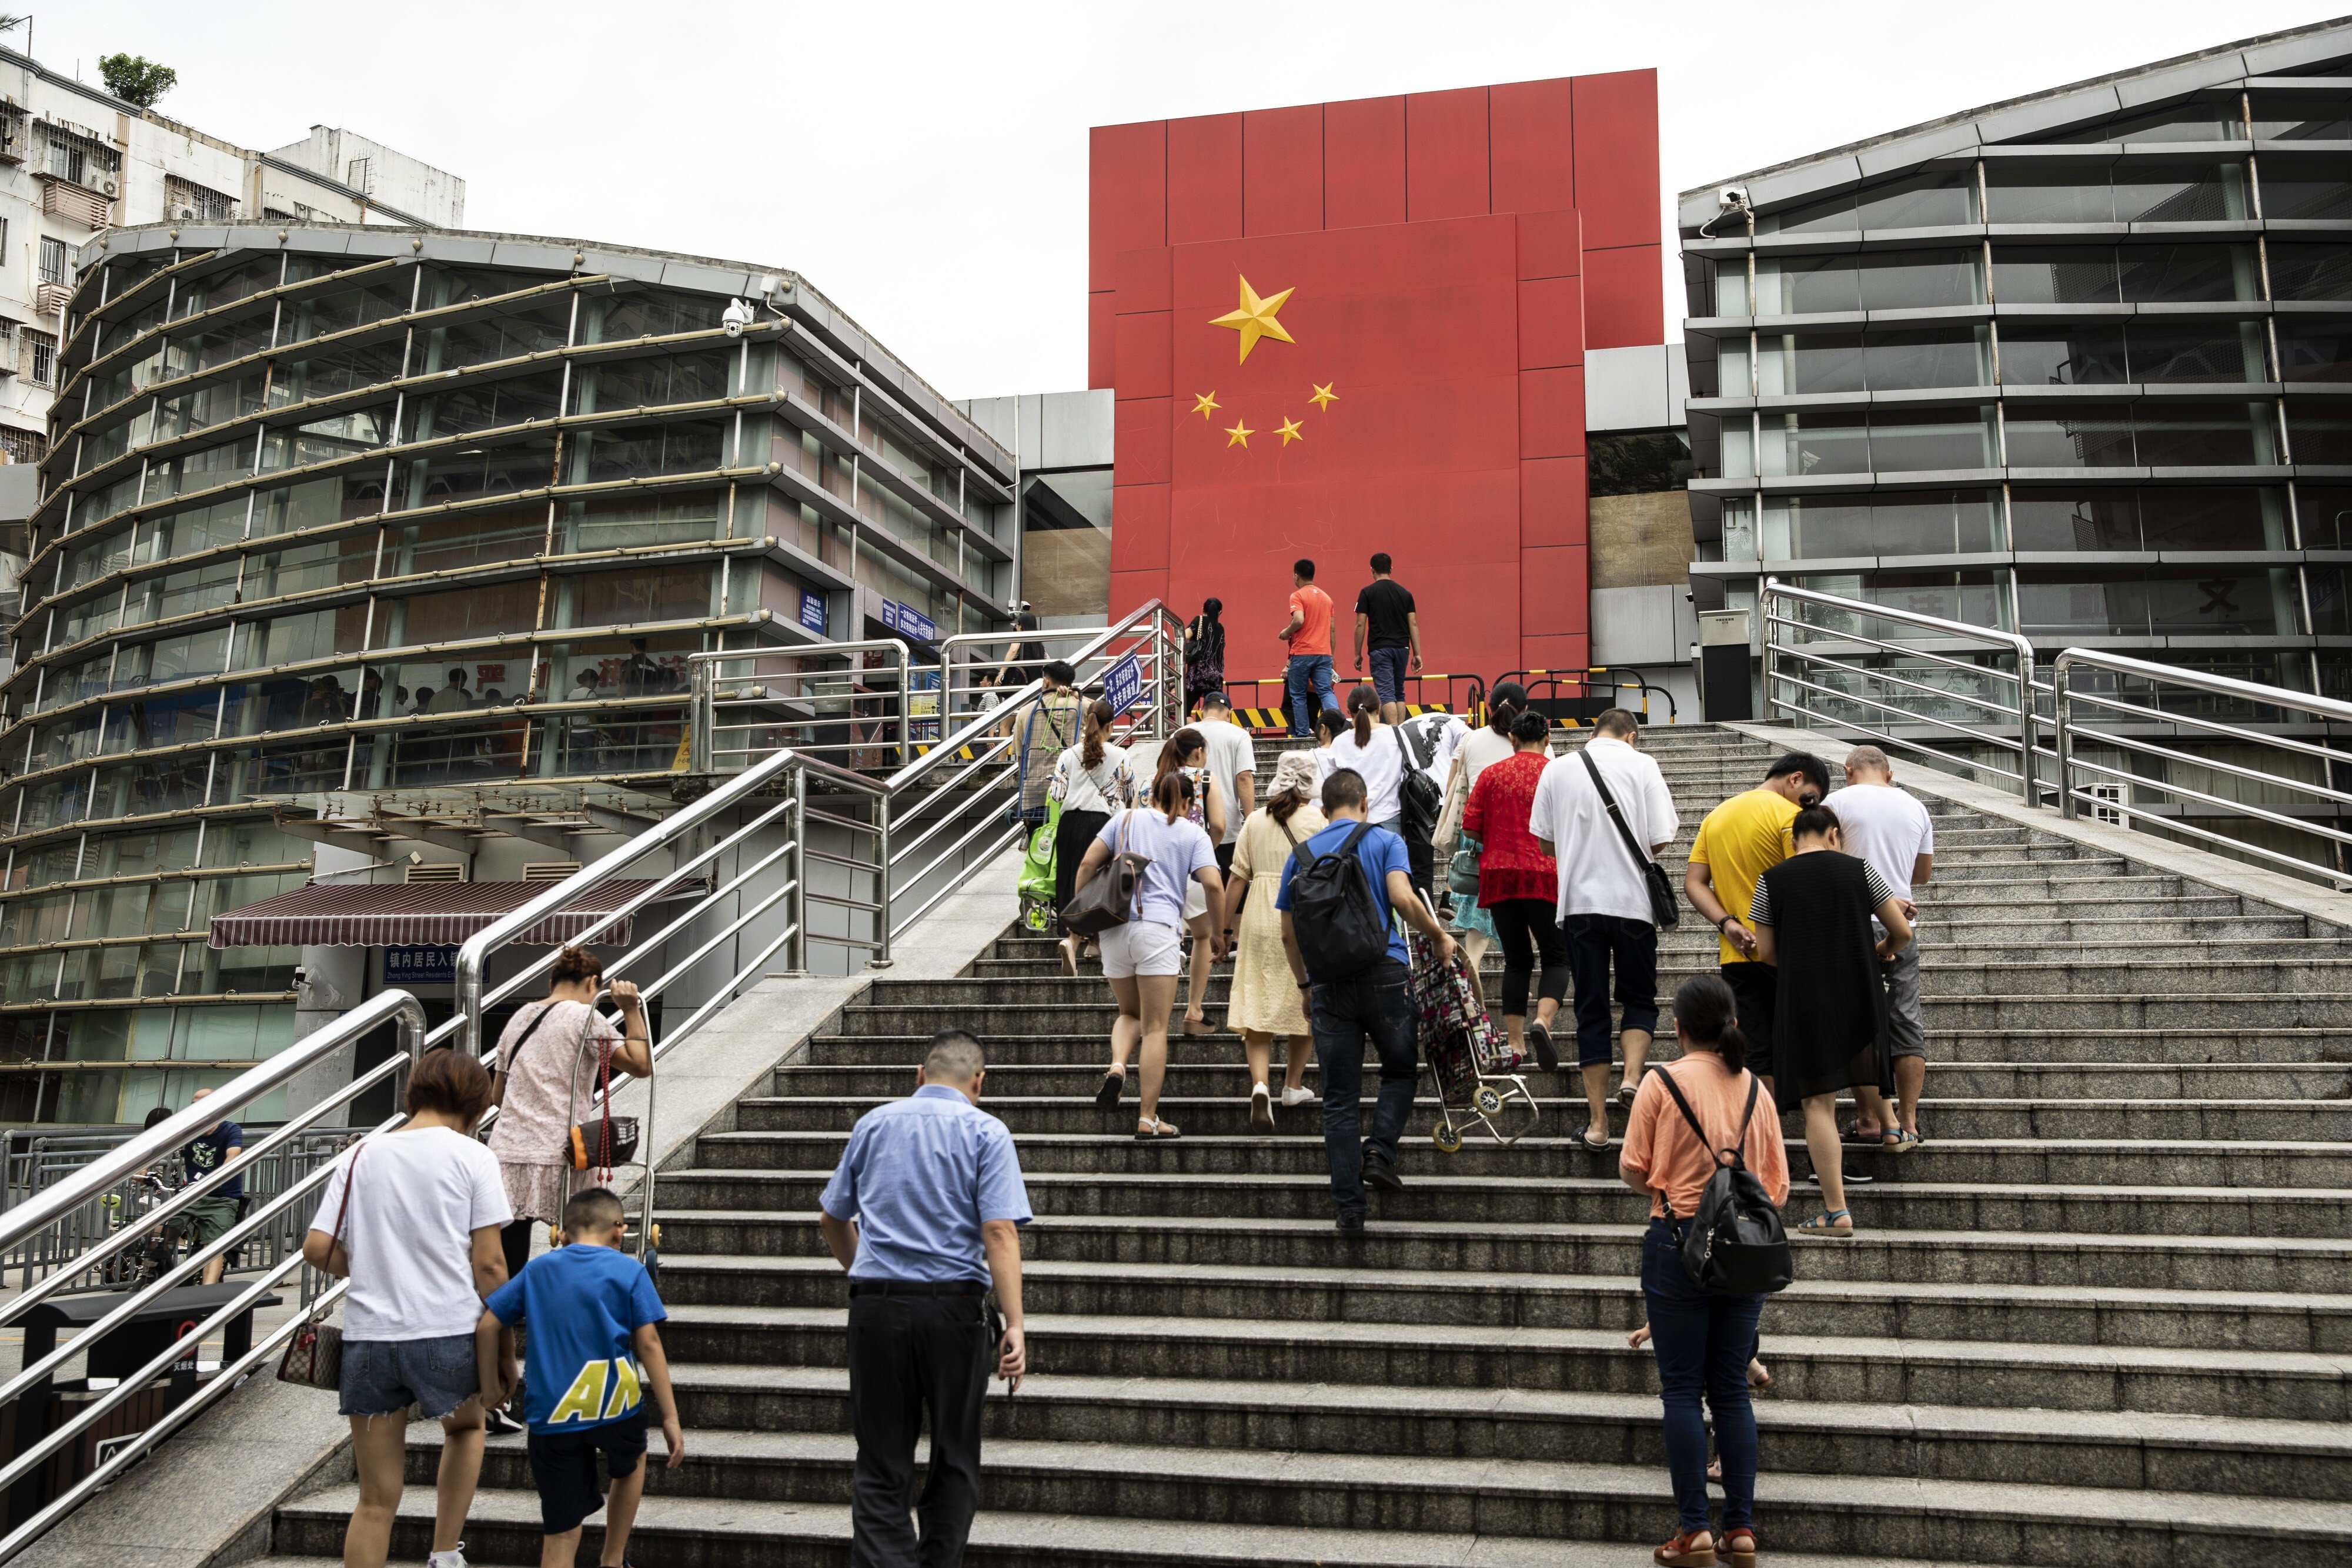 A border crossing facility in Shenzhen, Hong Kong’s neighbour to the north. Only one type of account opened in Hong Kong requires a trip to the mainland. Photo: Bloomberg